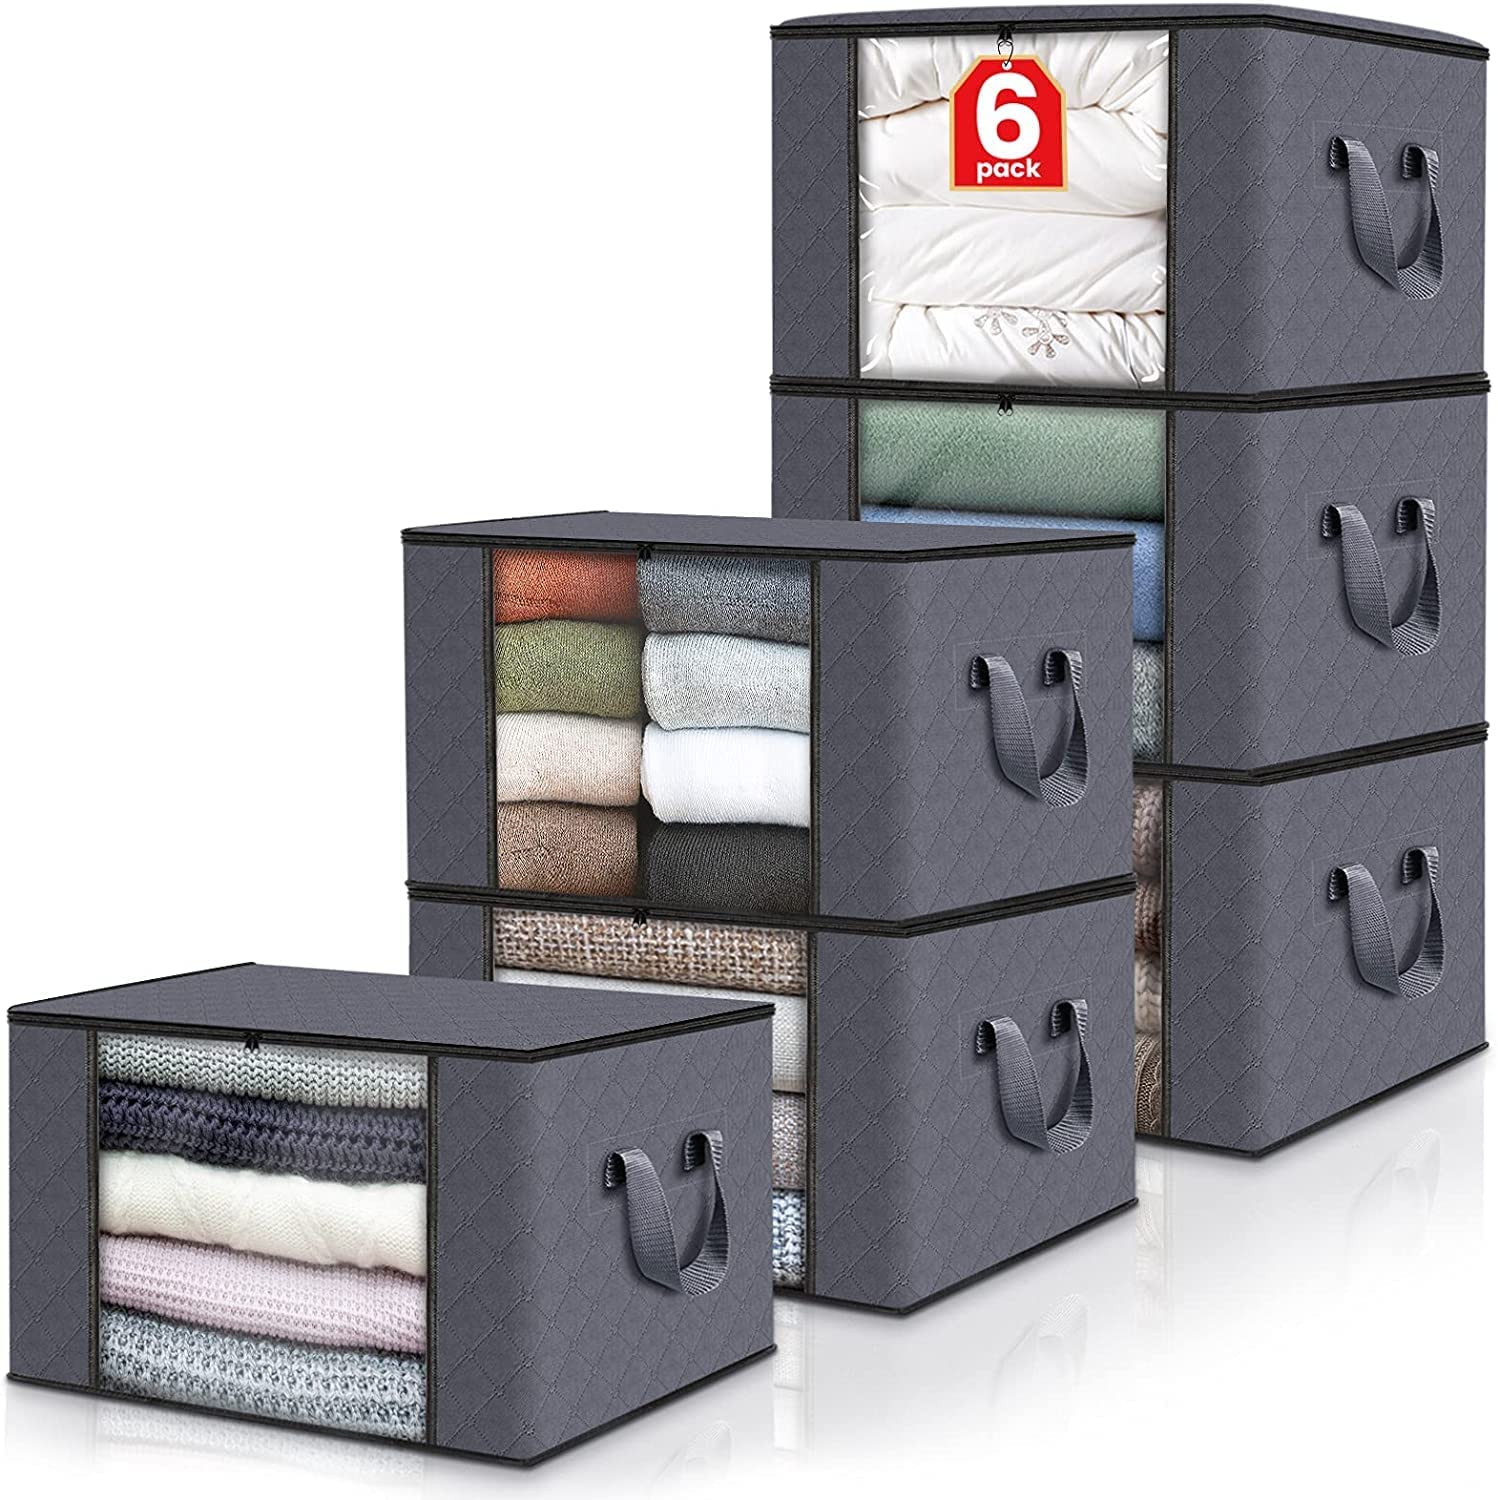 Soft clothing storage bags with clear window in gray